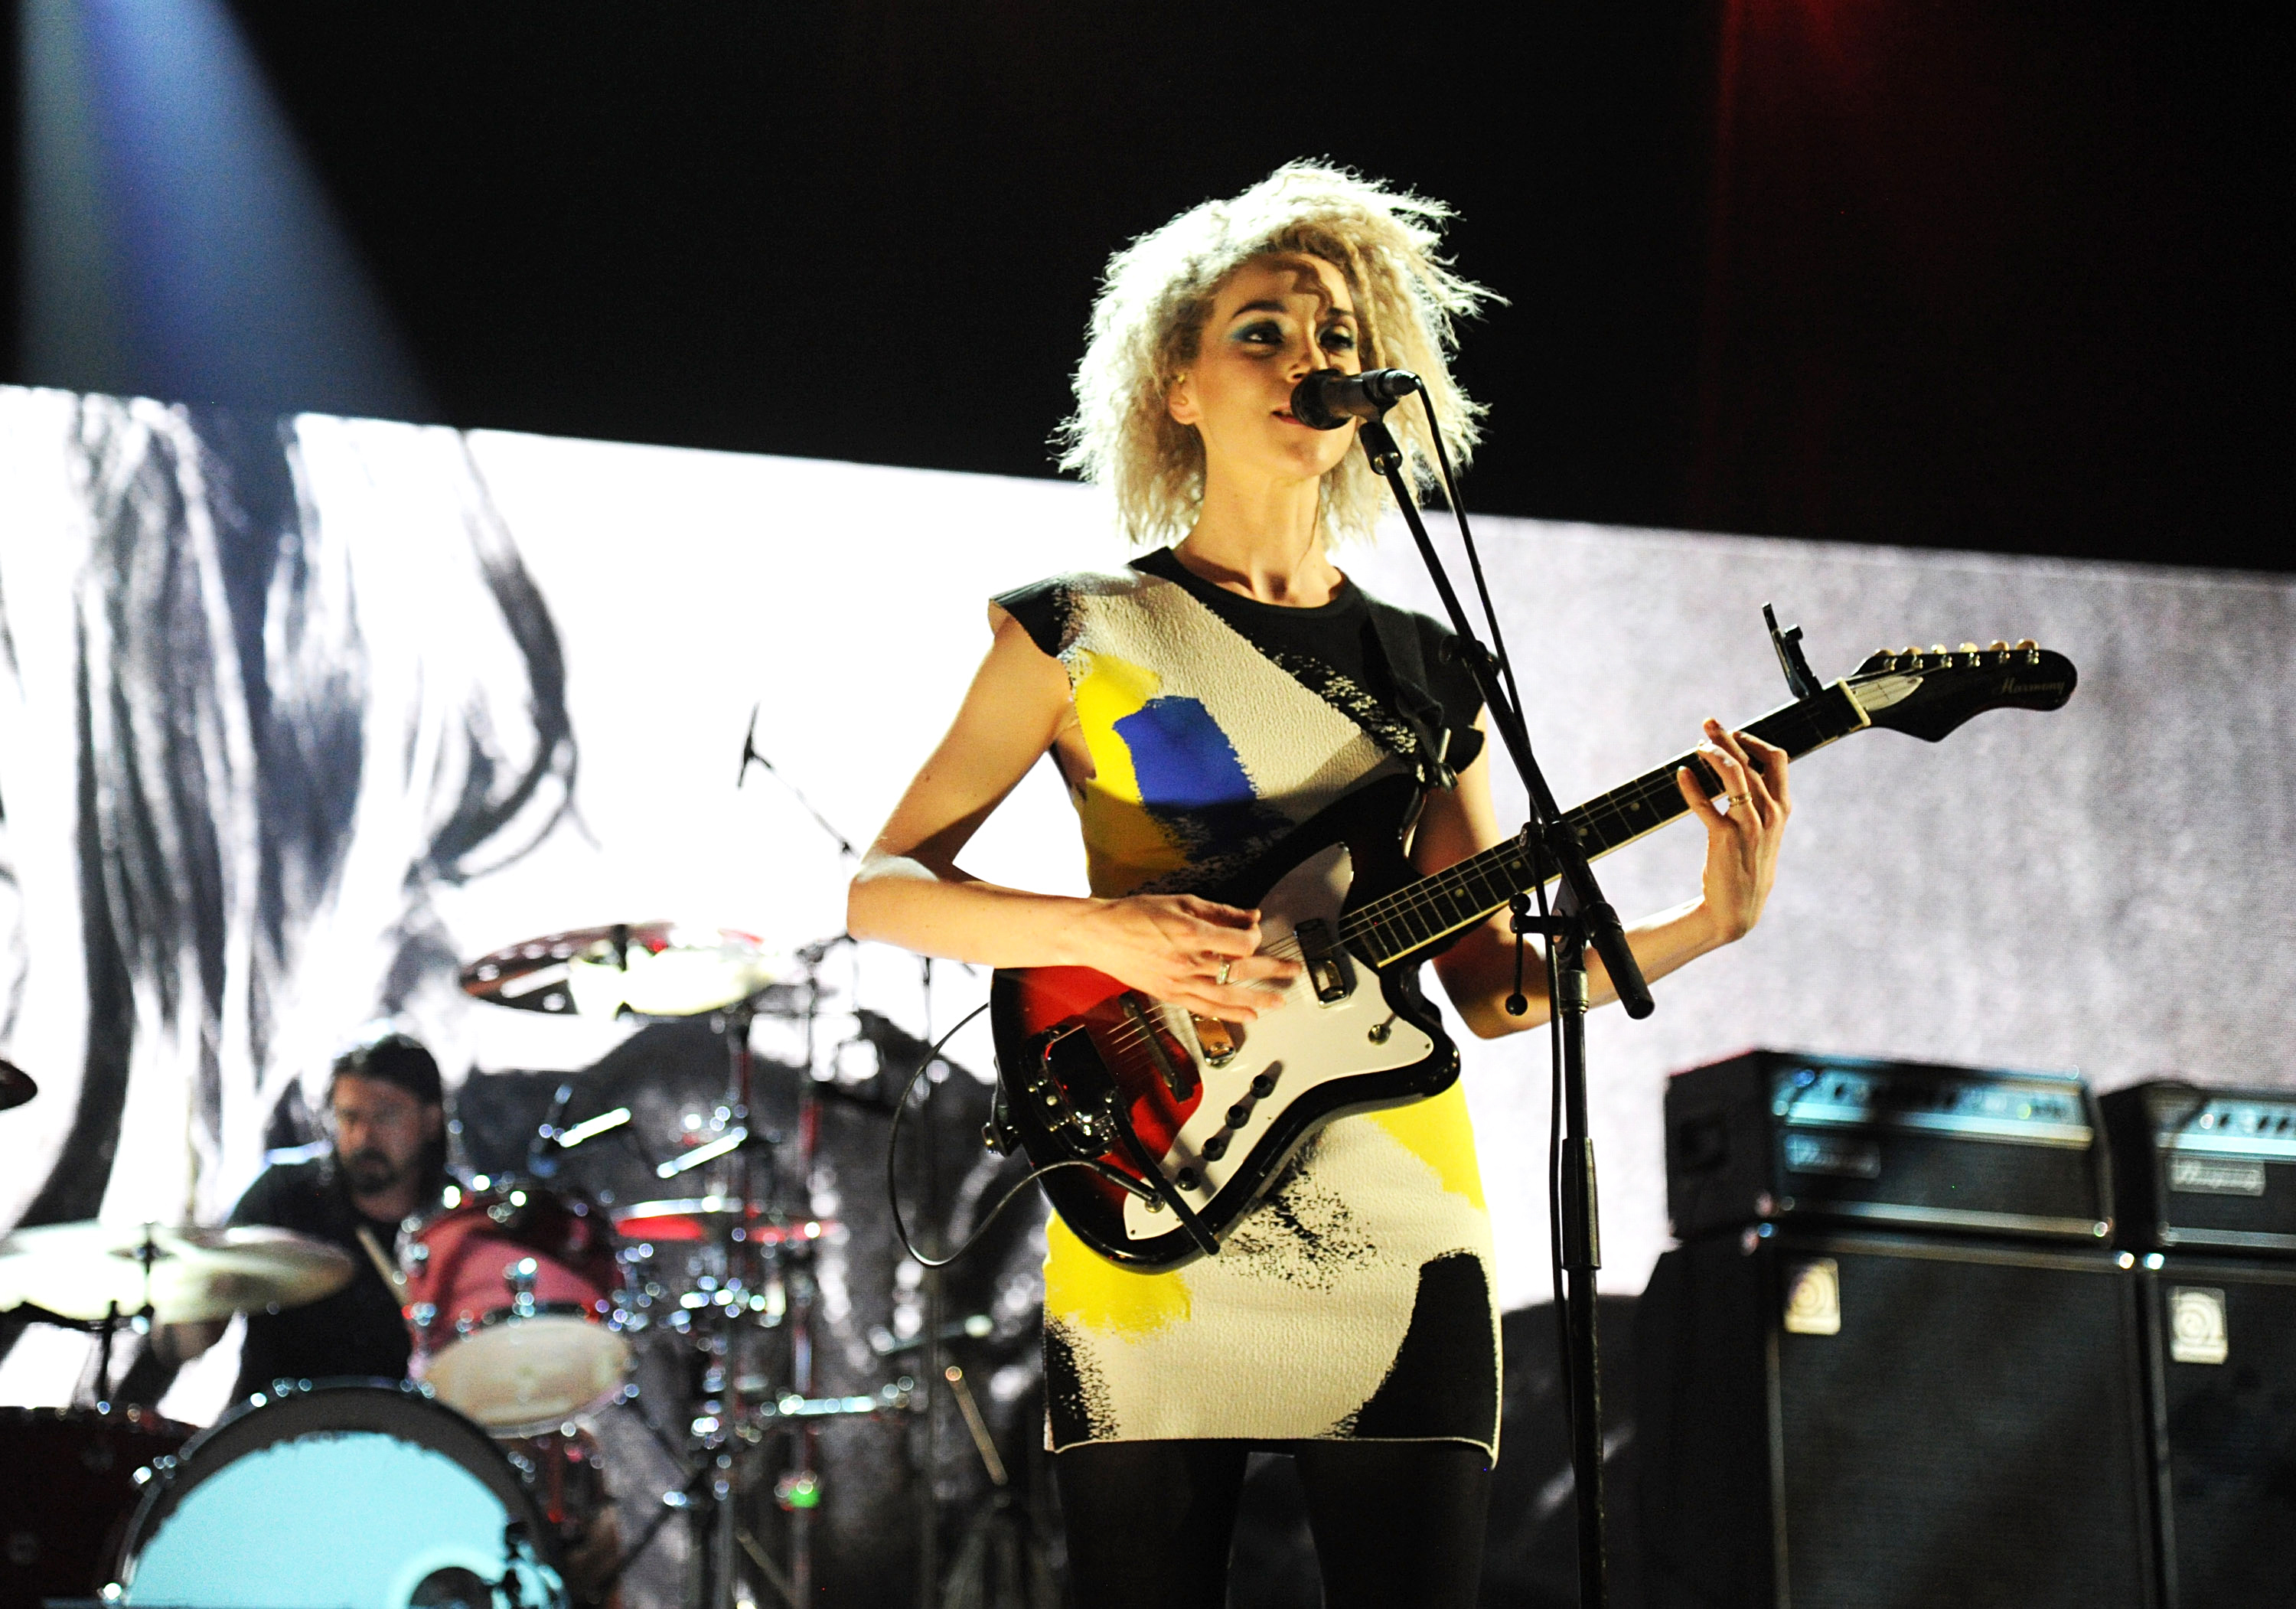 Watch: St. Vincent Covering Nirvana’s “Lithium” Preview